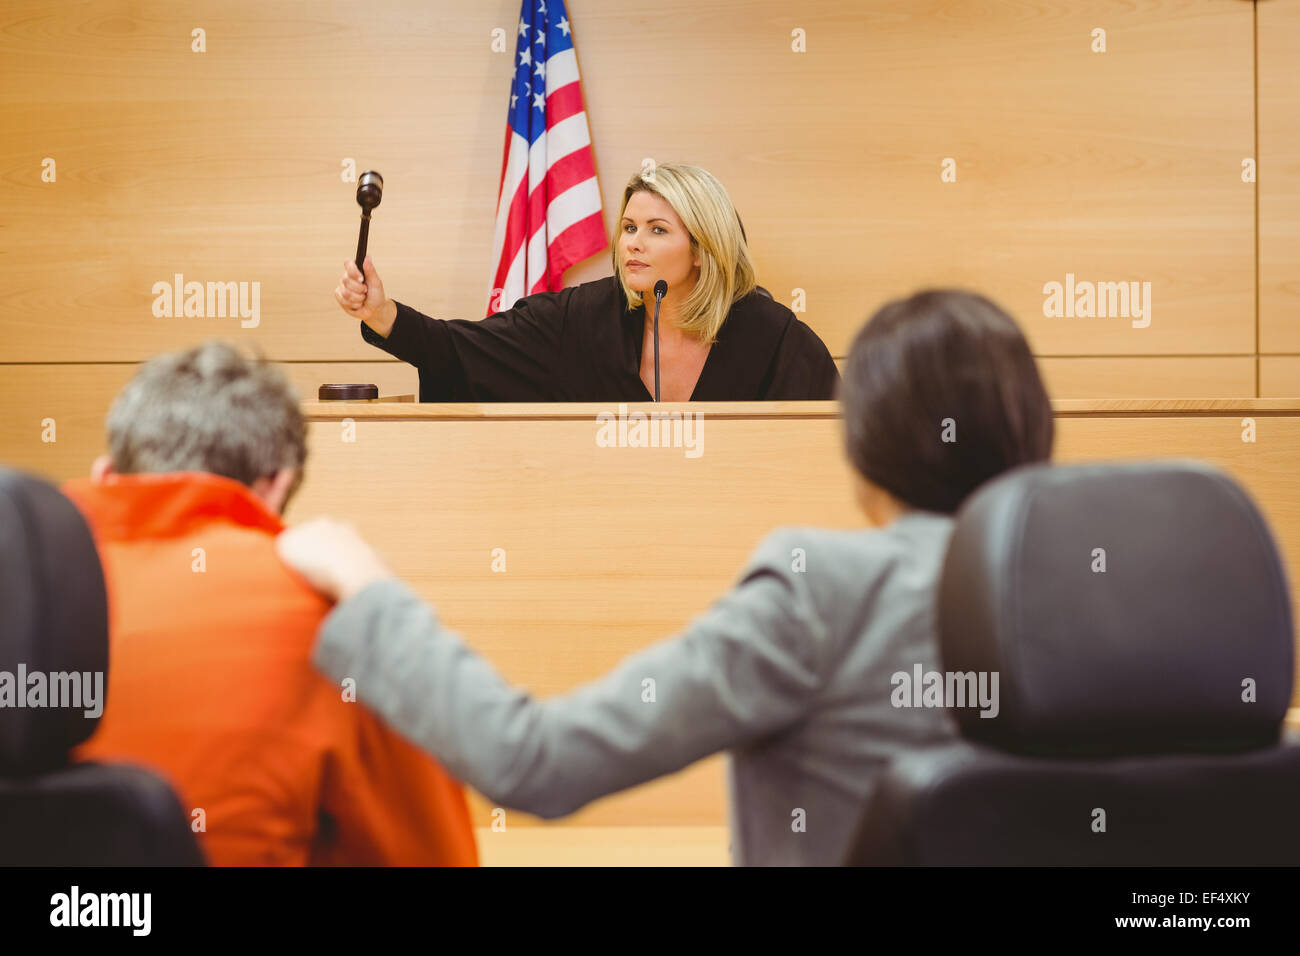 Judge about to bang gavel on sounding block Stock Photo